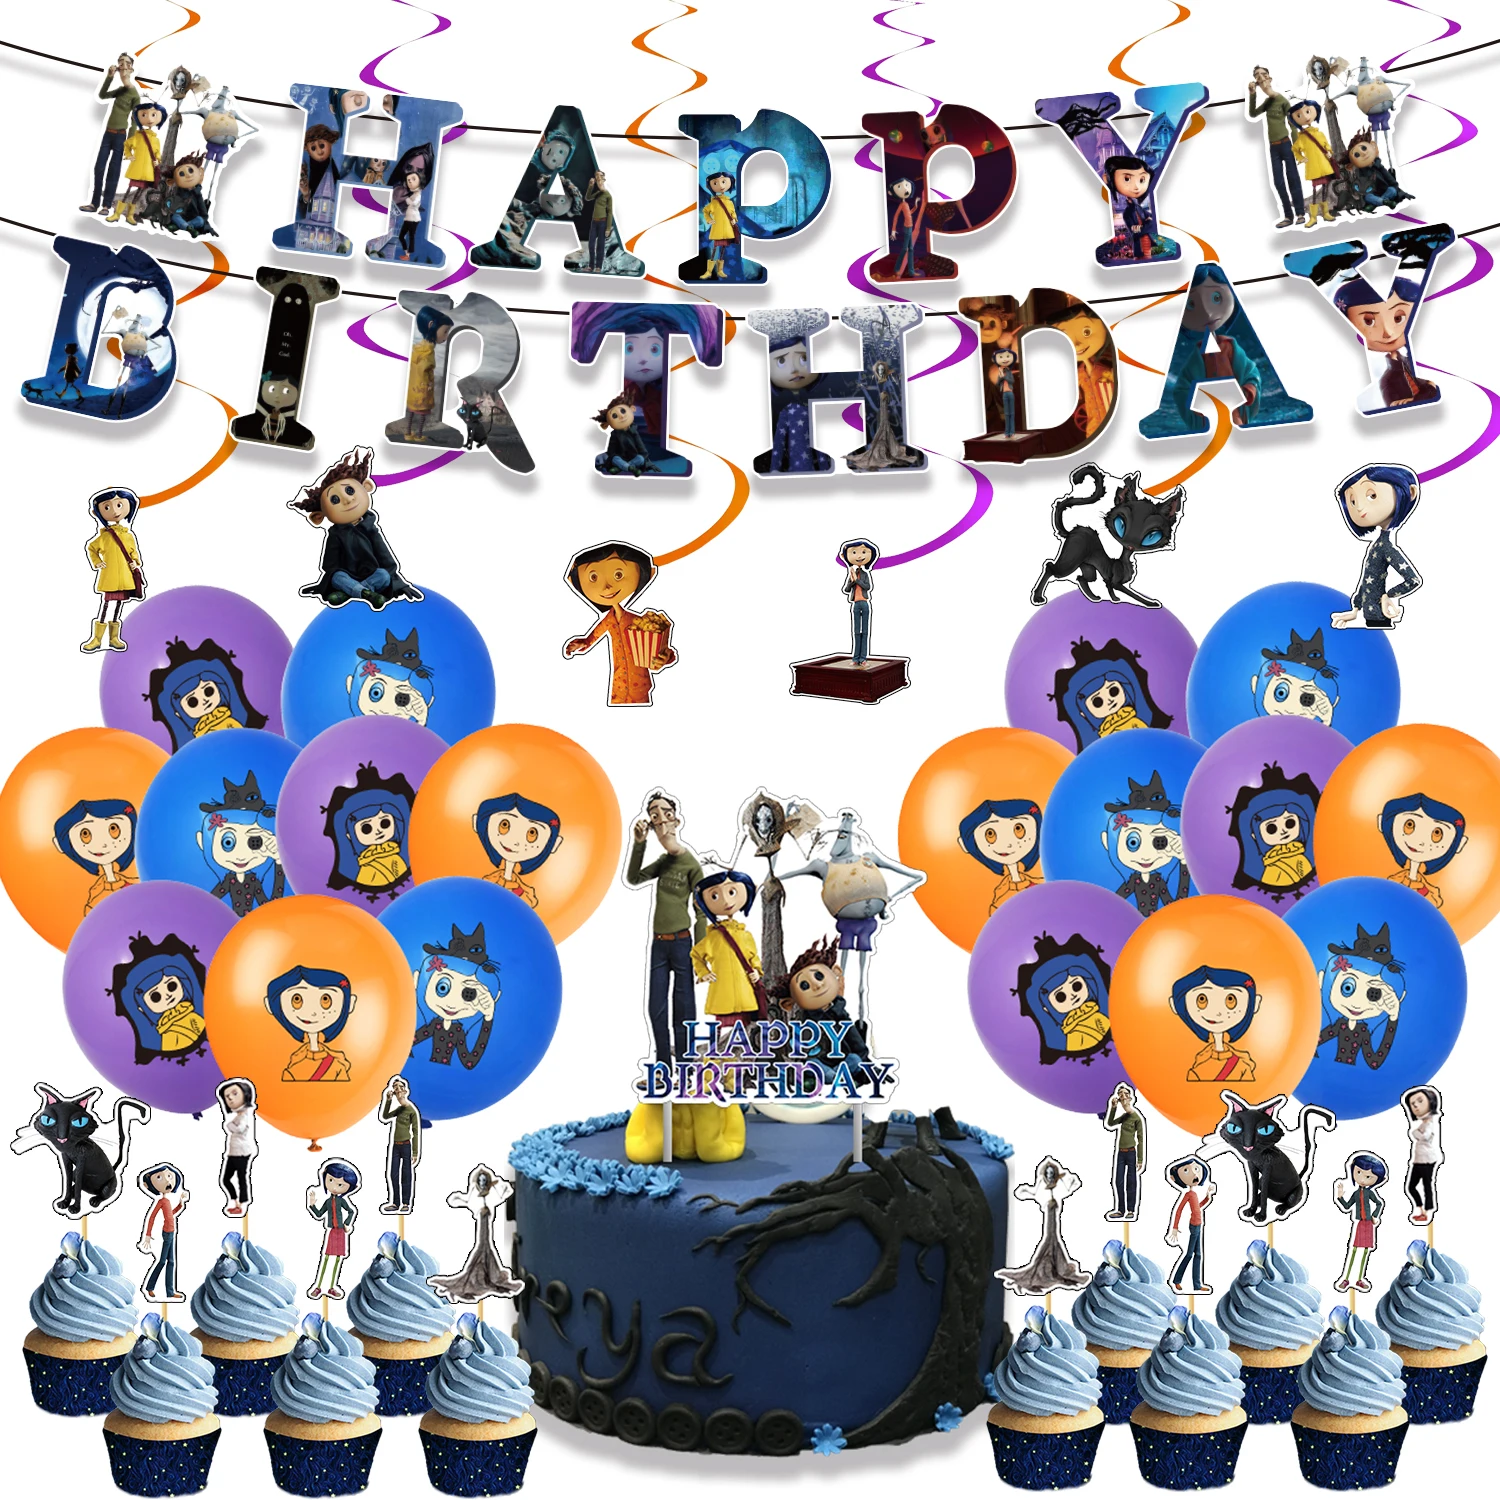 Coraline Theme Horror Series Birthday Party Decoration Set Banner Cake Card  Balloons Halloween Party Event Scene Layout Supplies